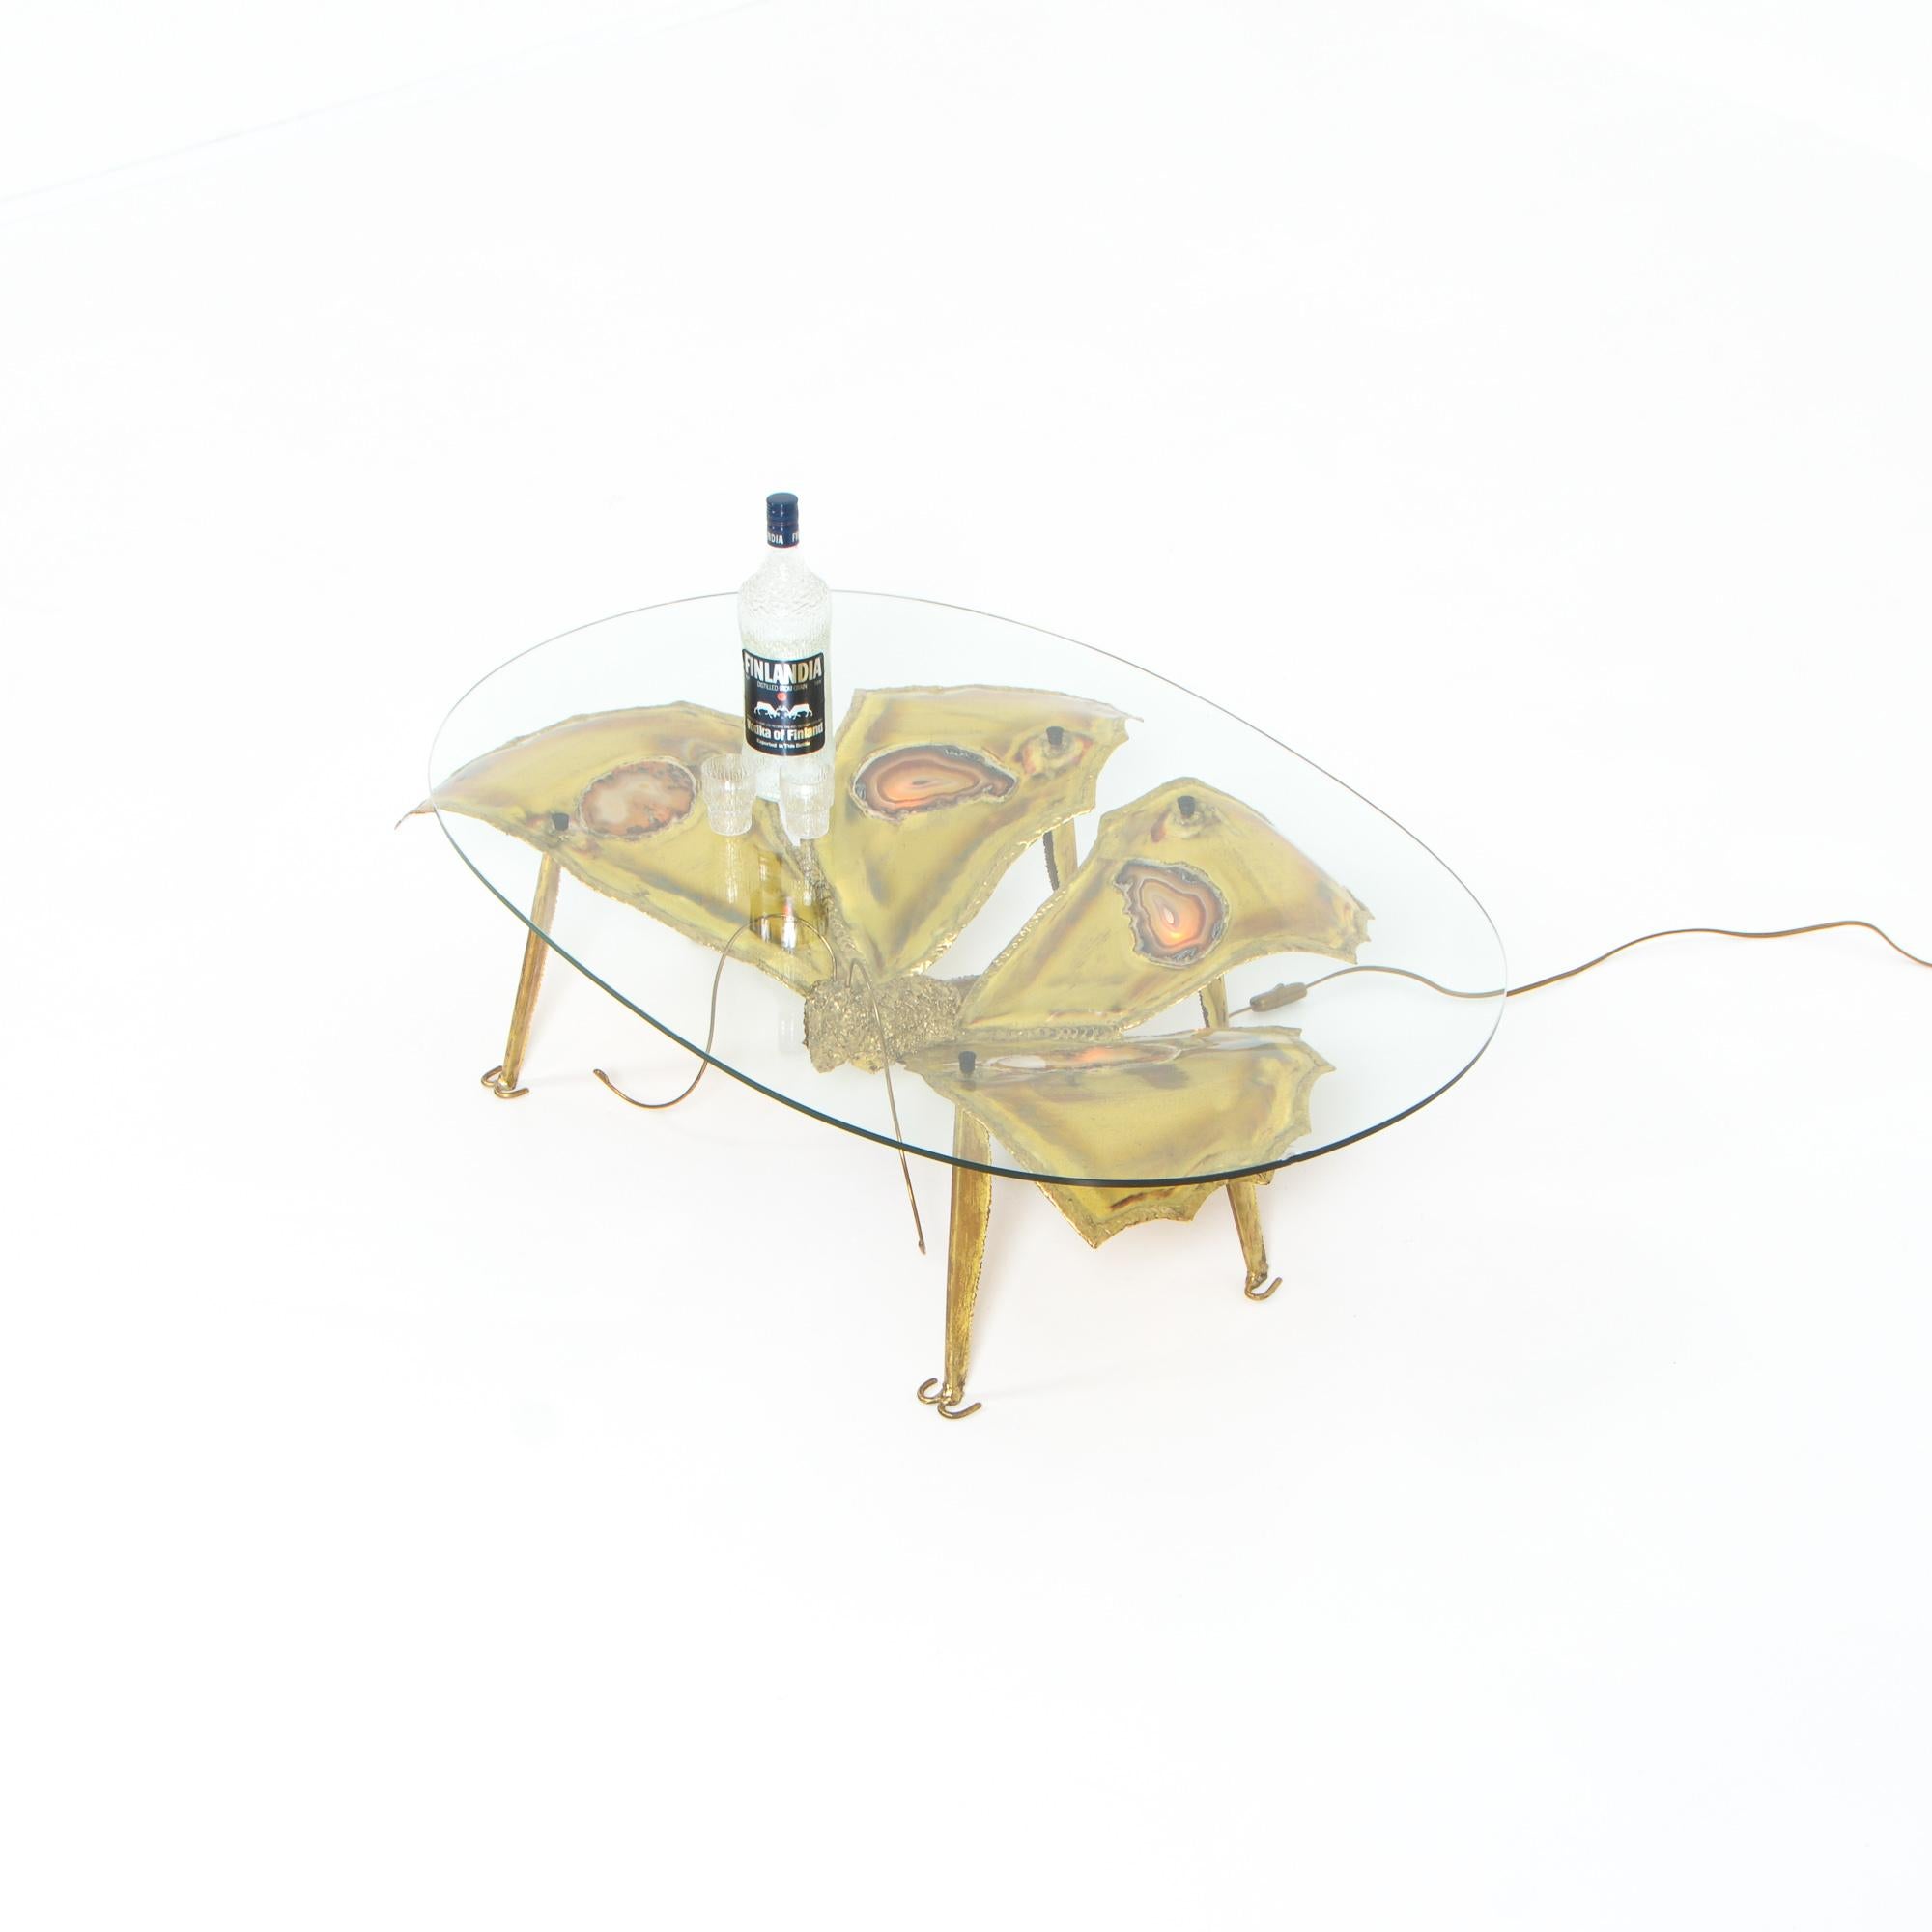 This brass Butterfly light sculpture and coffee table was designed by Henri Fernandez.
Henri Fernandez, born in 1946, is a French sculptor. His creations are unique pieces made by hand. He combines steel, copper, brass and minerals, such as agate